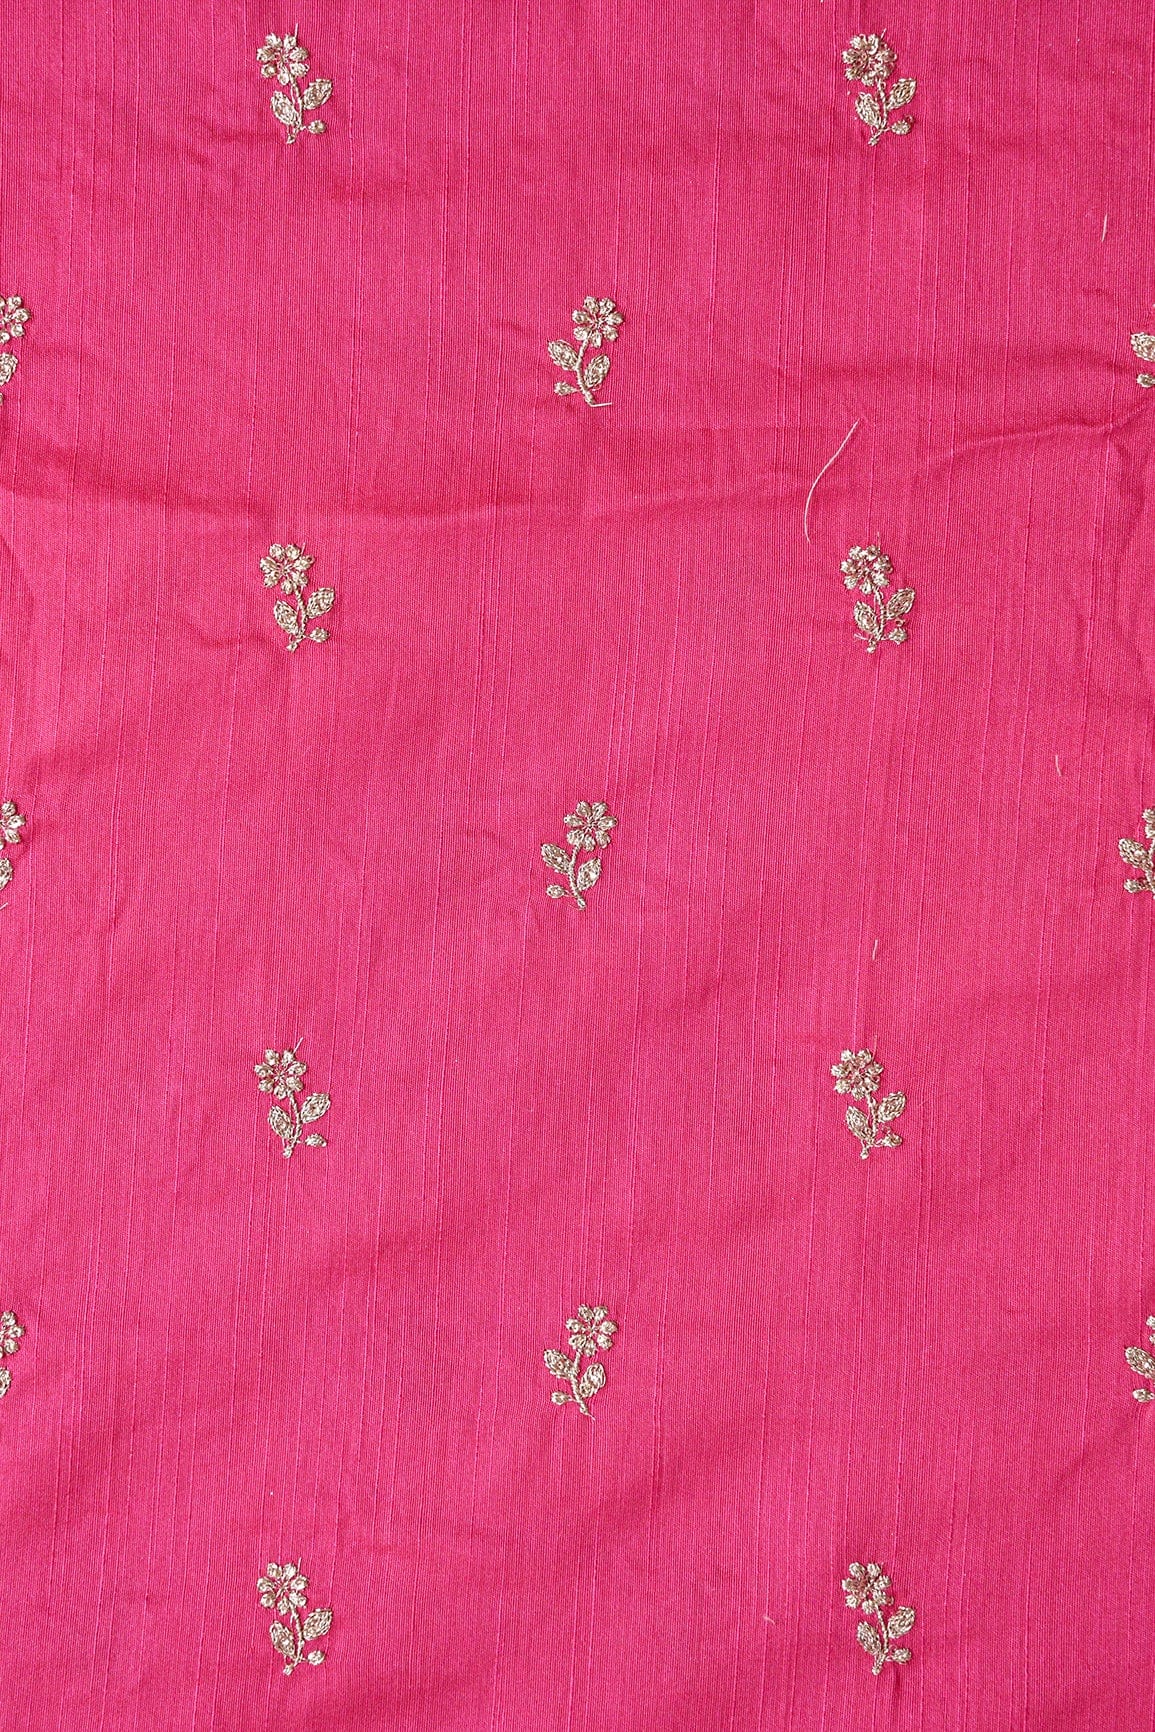 doeraa Embroidery Fabrics Gold Sequins With Gold Zari Small Floral Motif Embroidery Work On Fuchsia Raw Silk Fabric